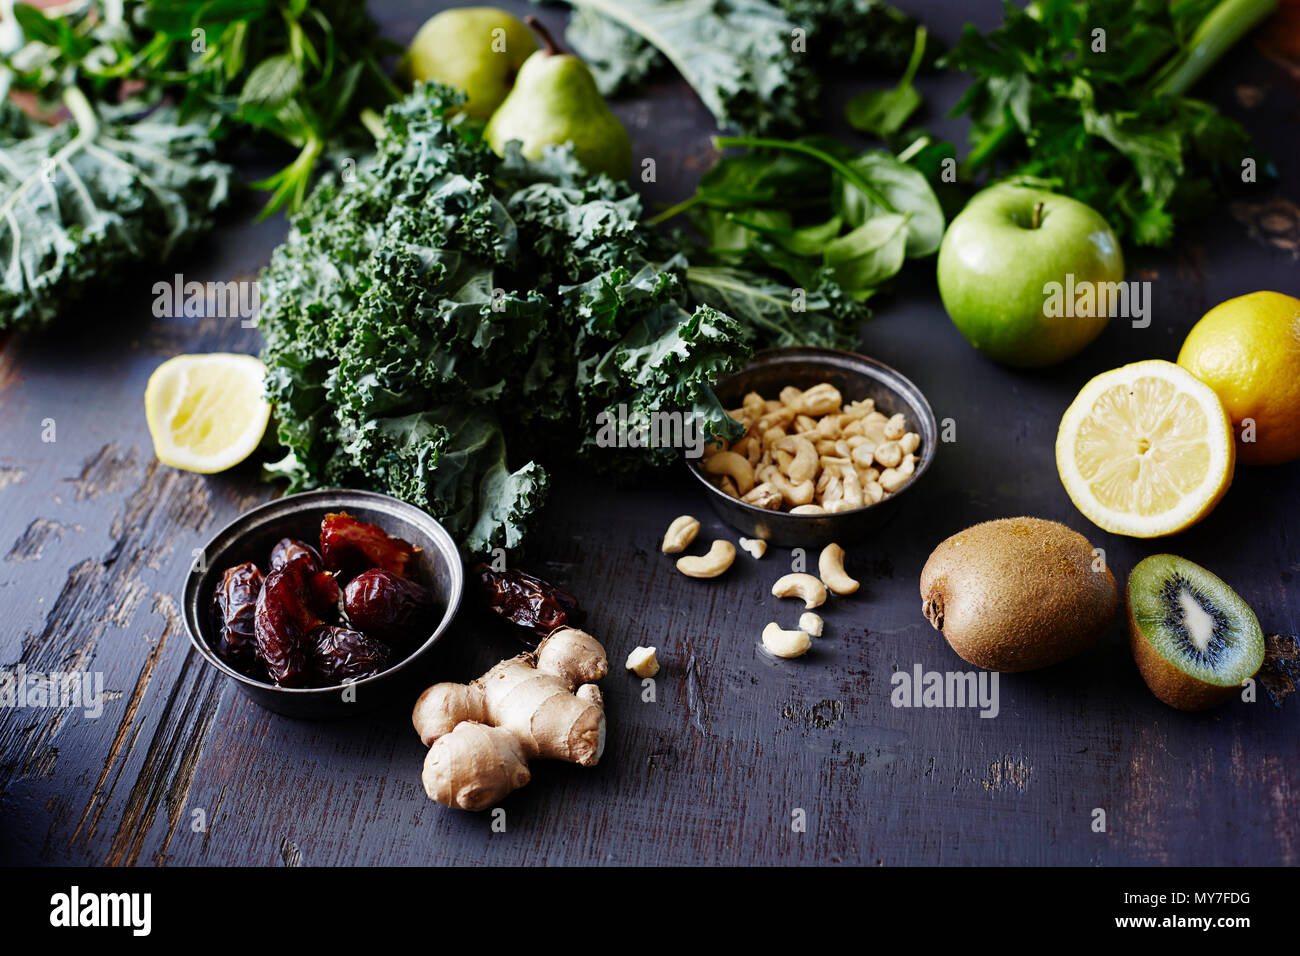 Ingredients for kale and kiwi fruit green smoothie, close-up Stock Photo